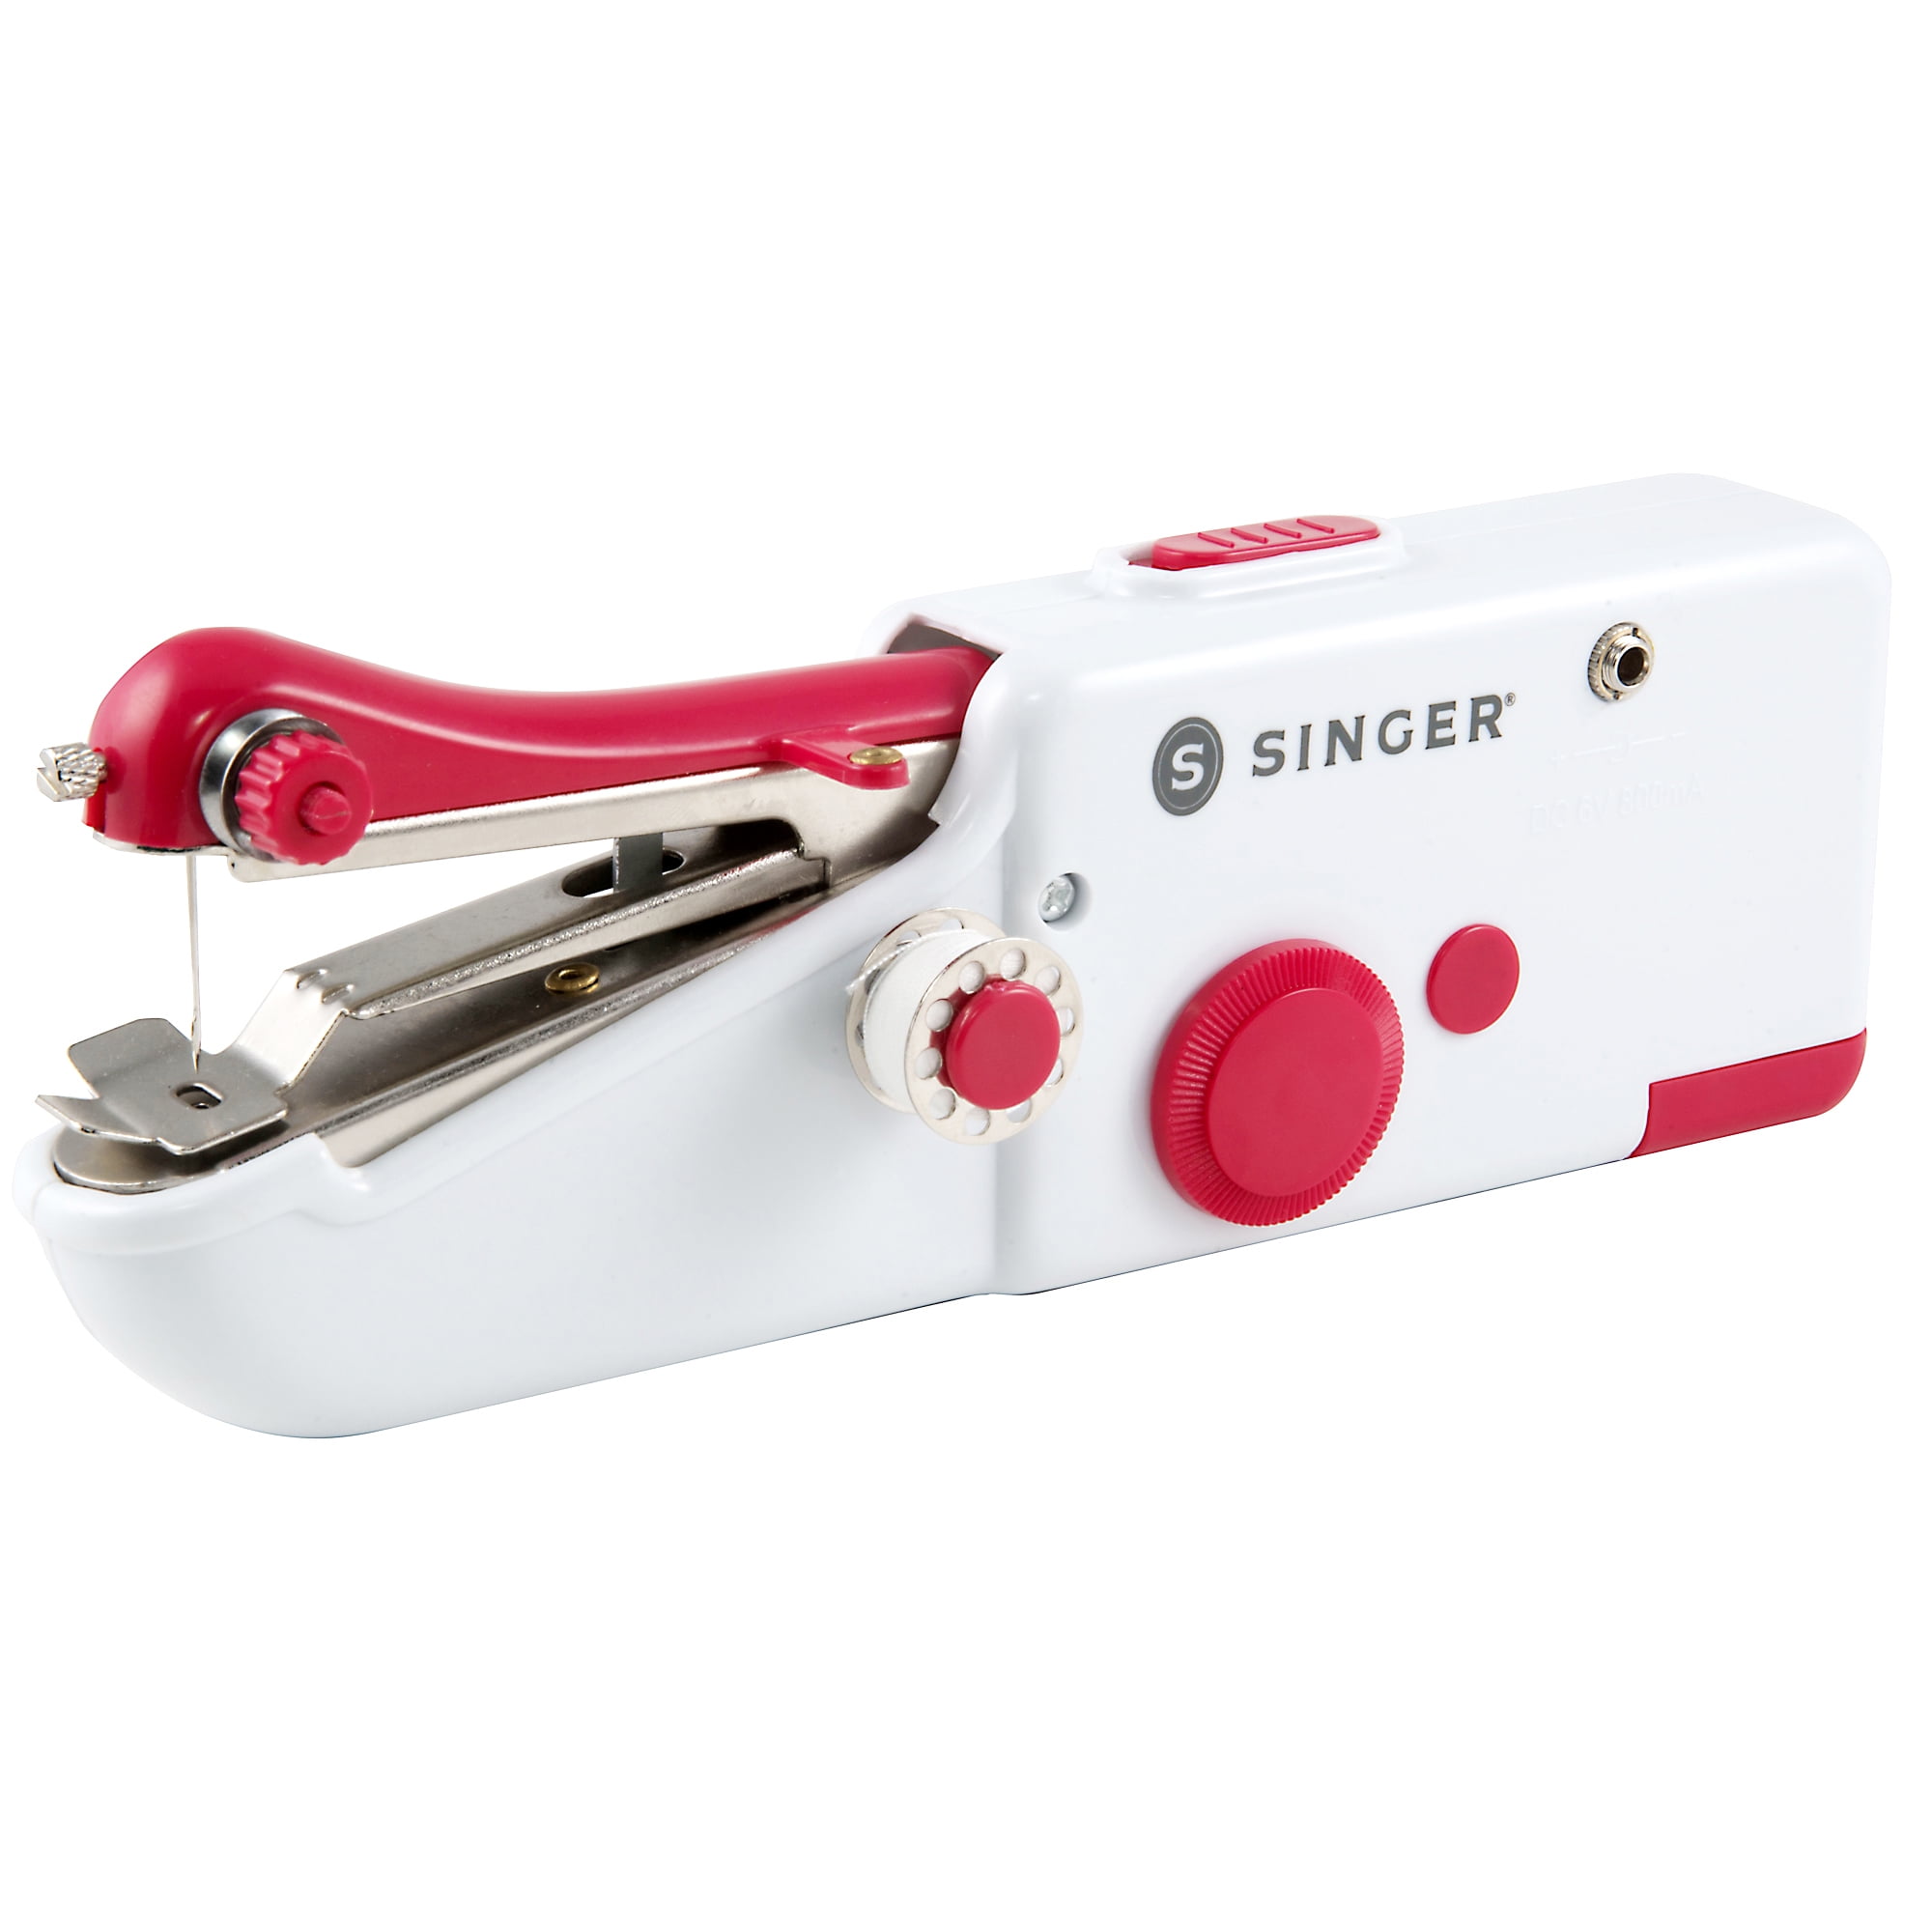 Singer Stich Sew Quick Hand Held Sewing Device Mending Crafting USA Seller